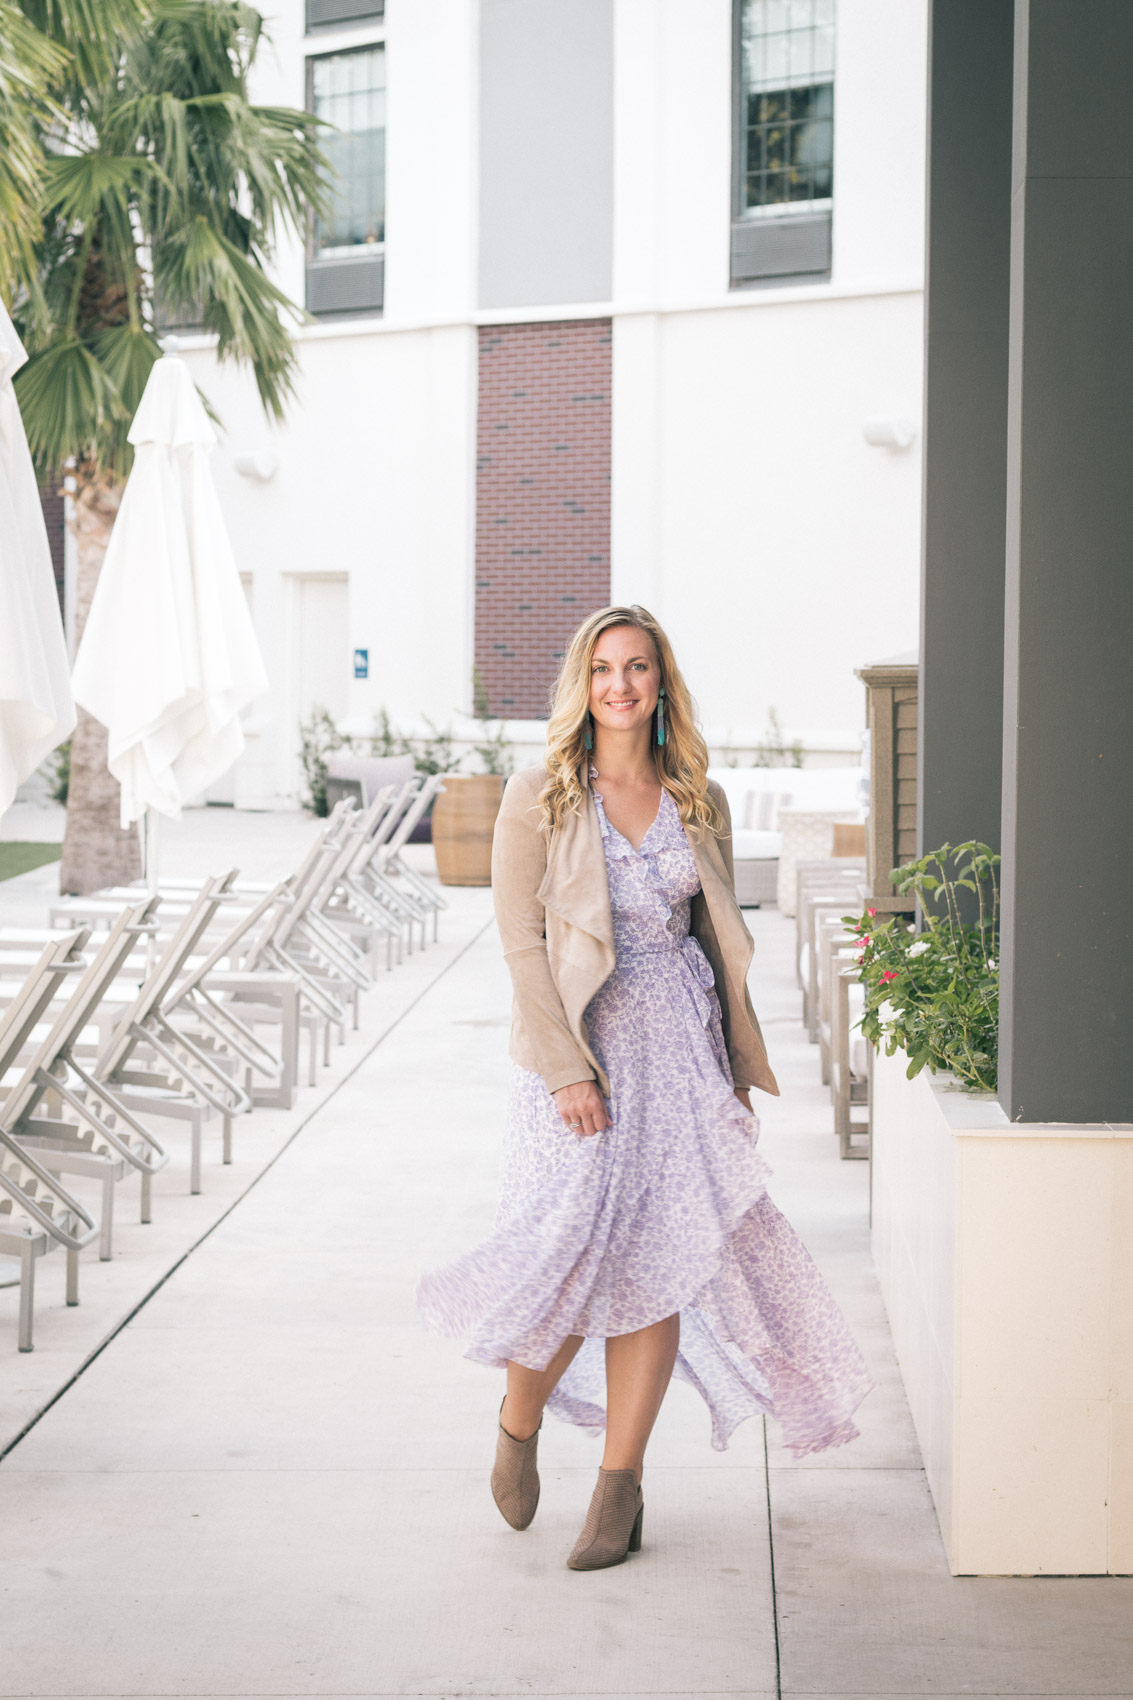 Outfit ideas for cold spring days - layer a jacket over a flowy dress and add ankle booties!